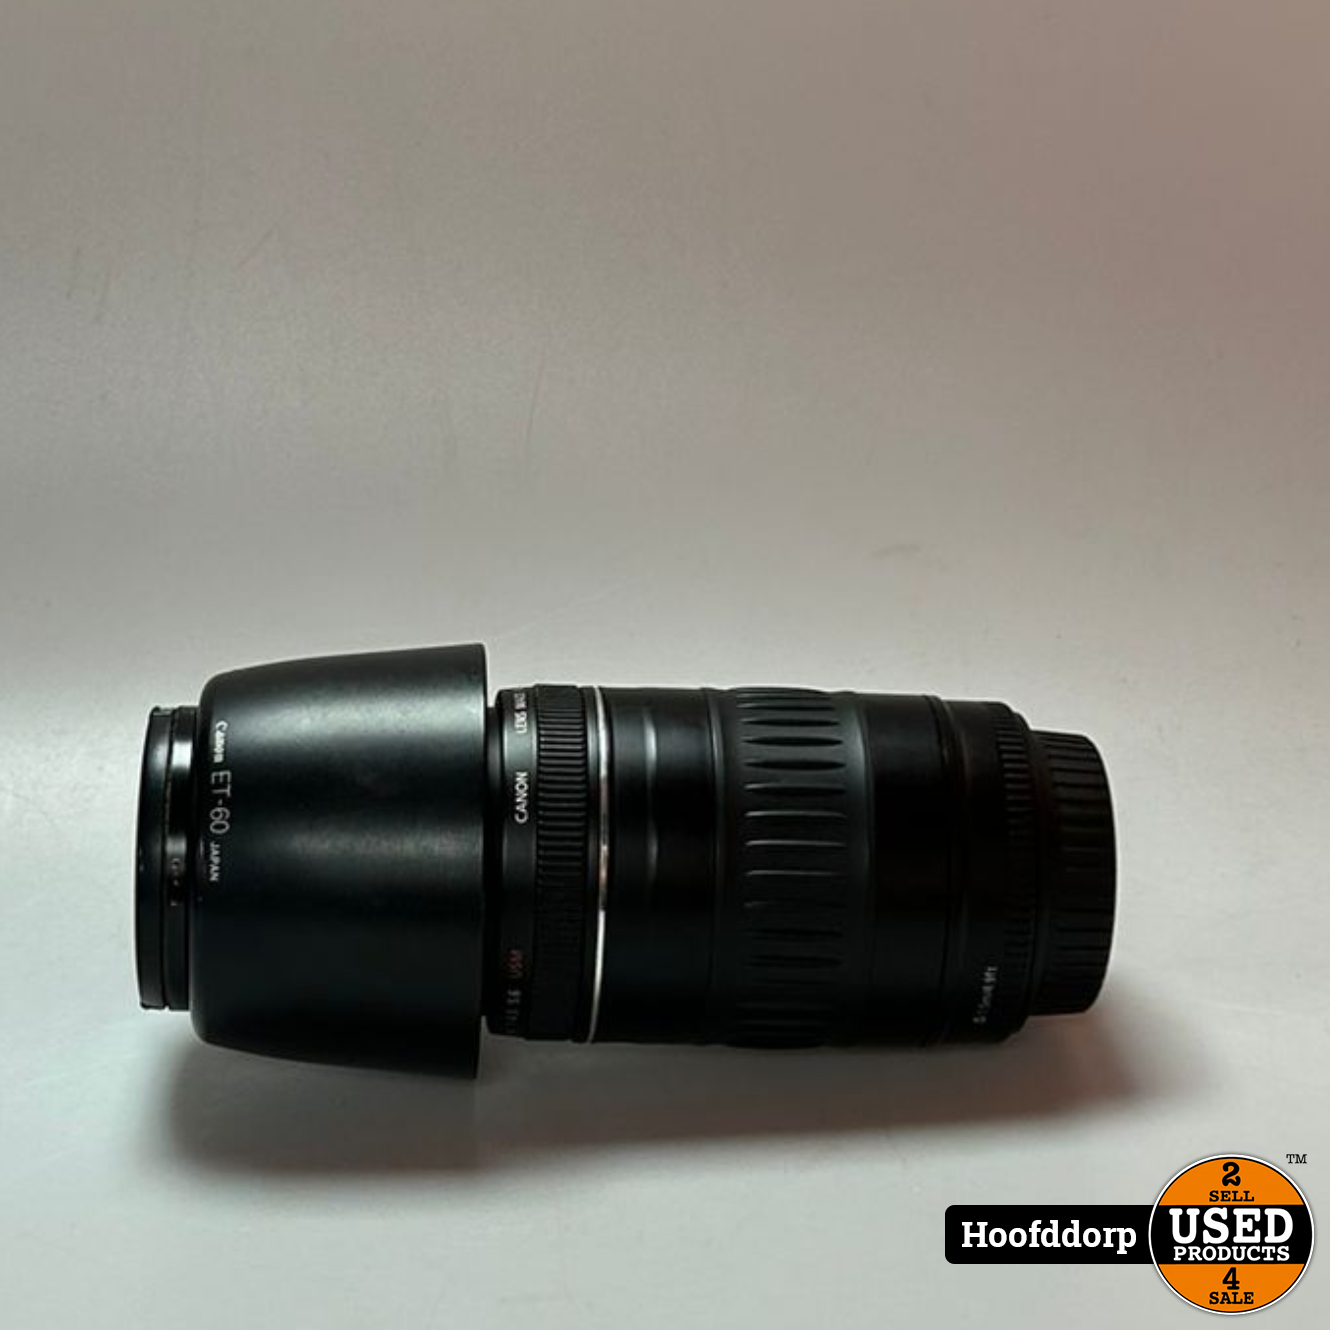 Canon Zoom Lens EF 90-300mm 1:4.5-5.6 USM - Used Products Hoofddorp